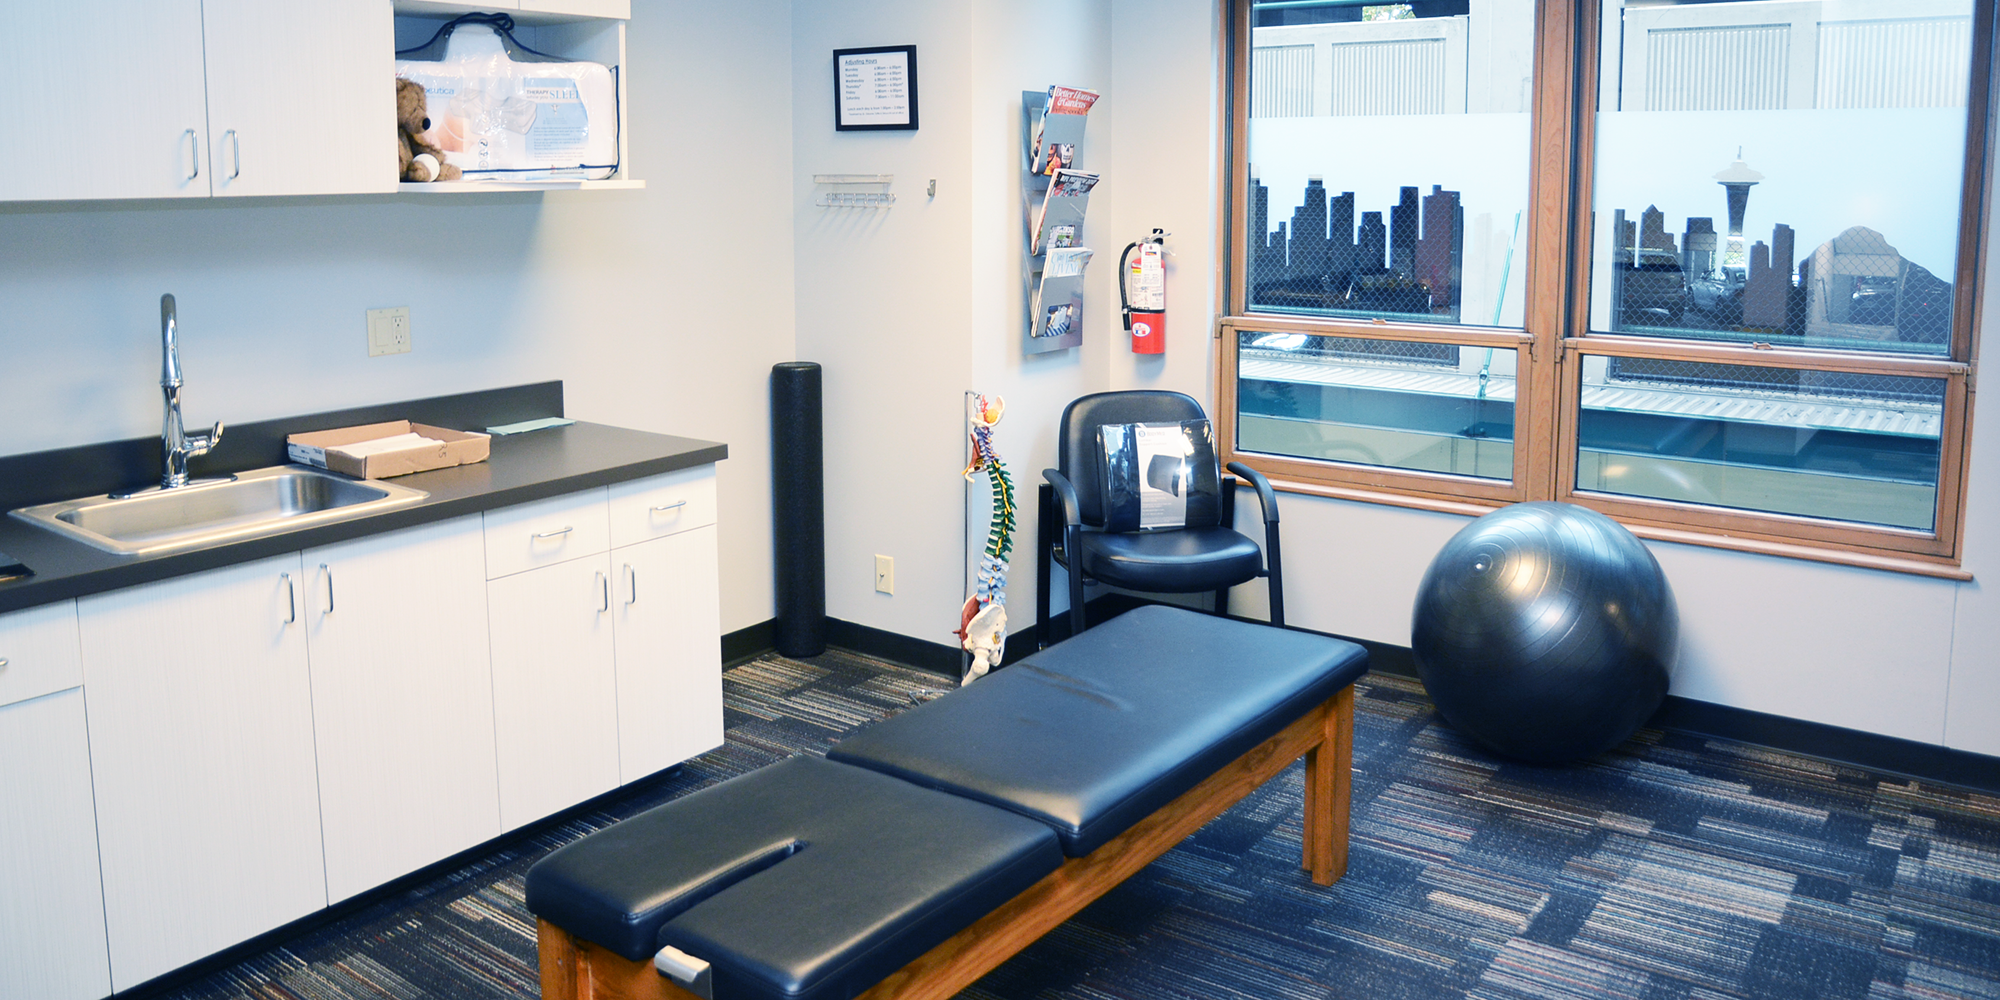 Seattle Chiropractic Care